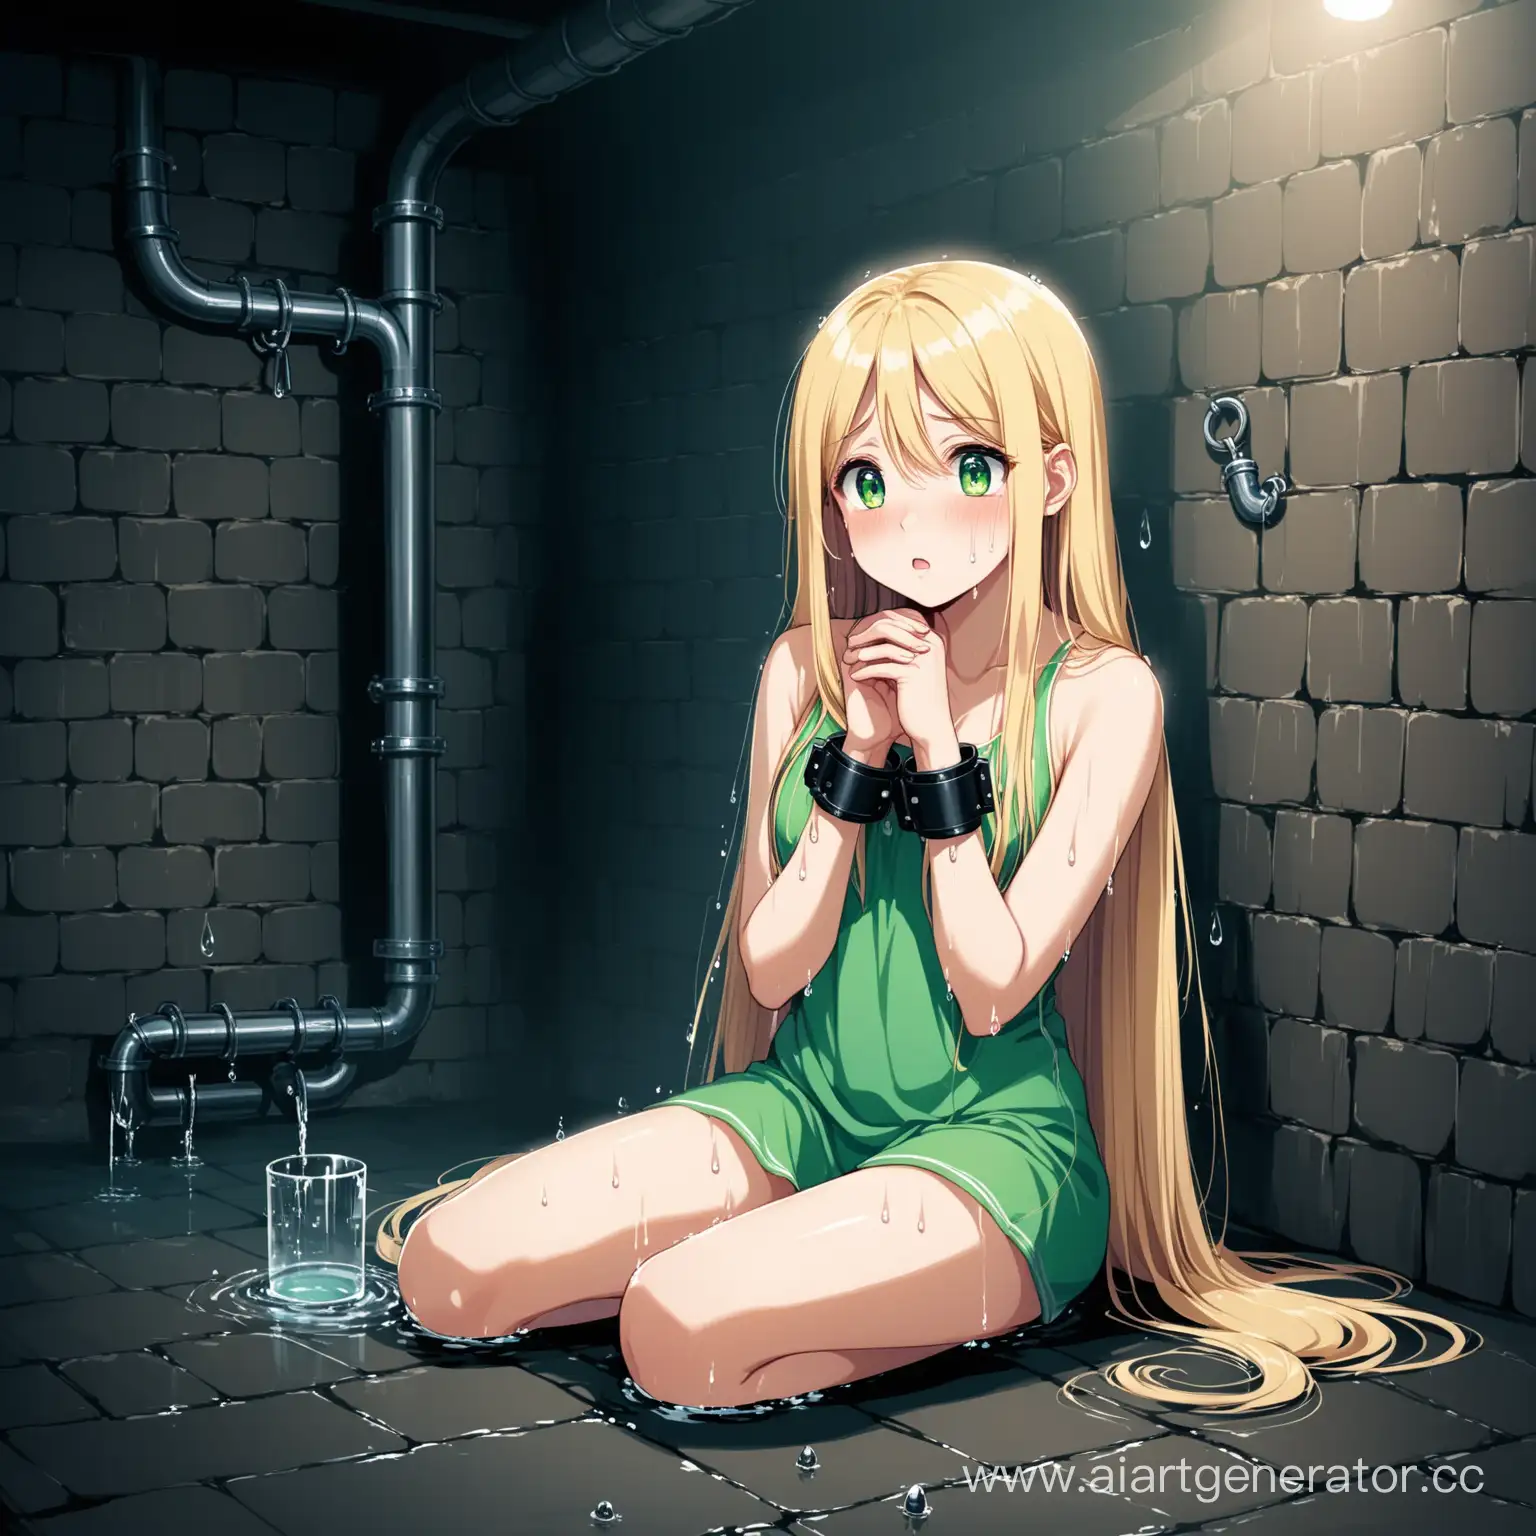 a beautiful girl, long blonde straight hair, green eyes, she is sitting on the floor, near the pipe, her hands are handcuffed to the pipe behind her, there are drops of water on it, against the background of the basement, She looks scared.